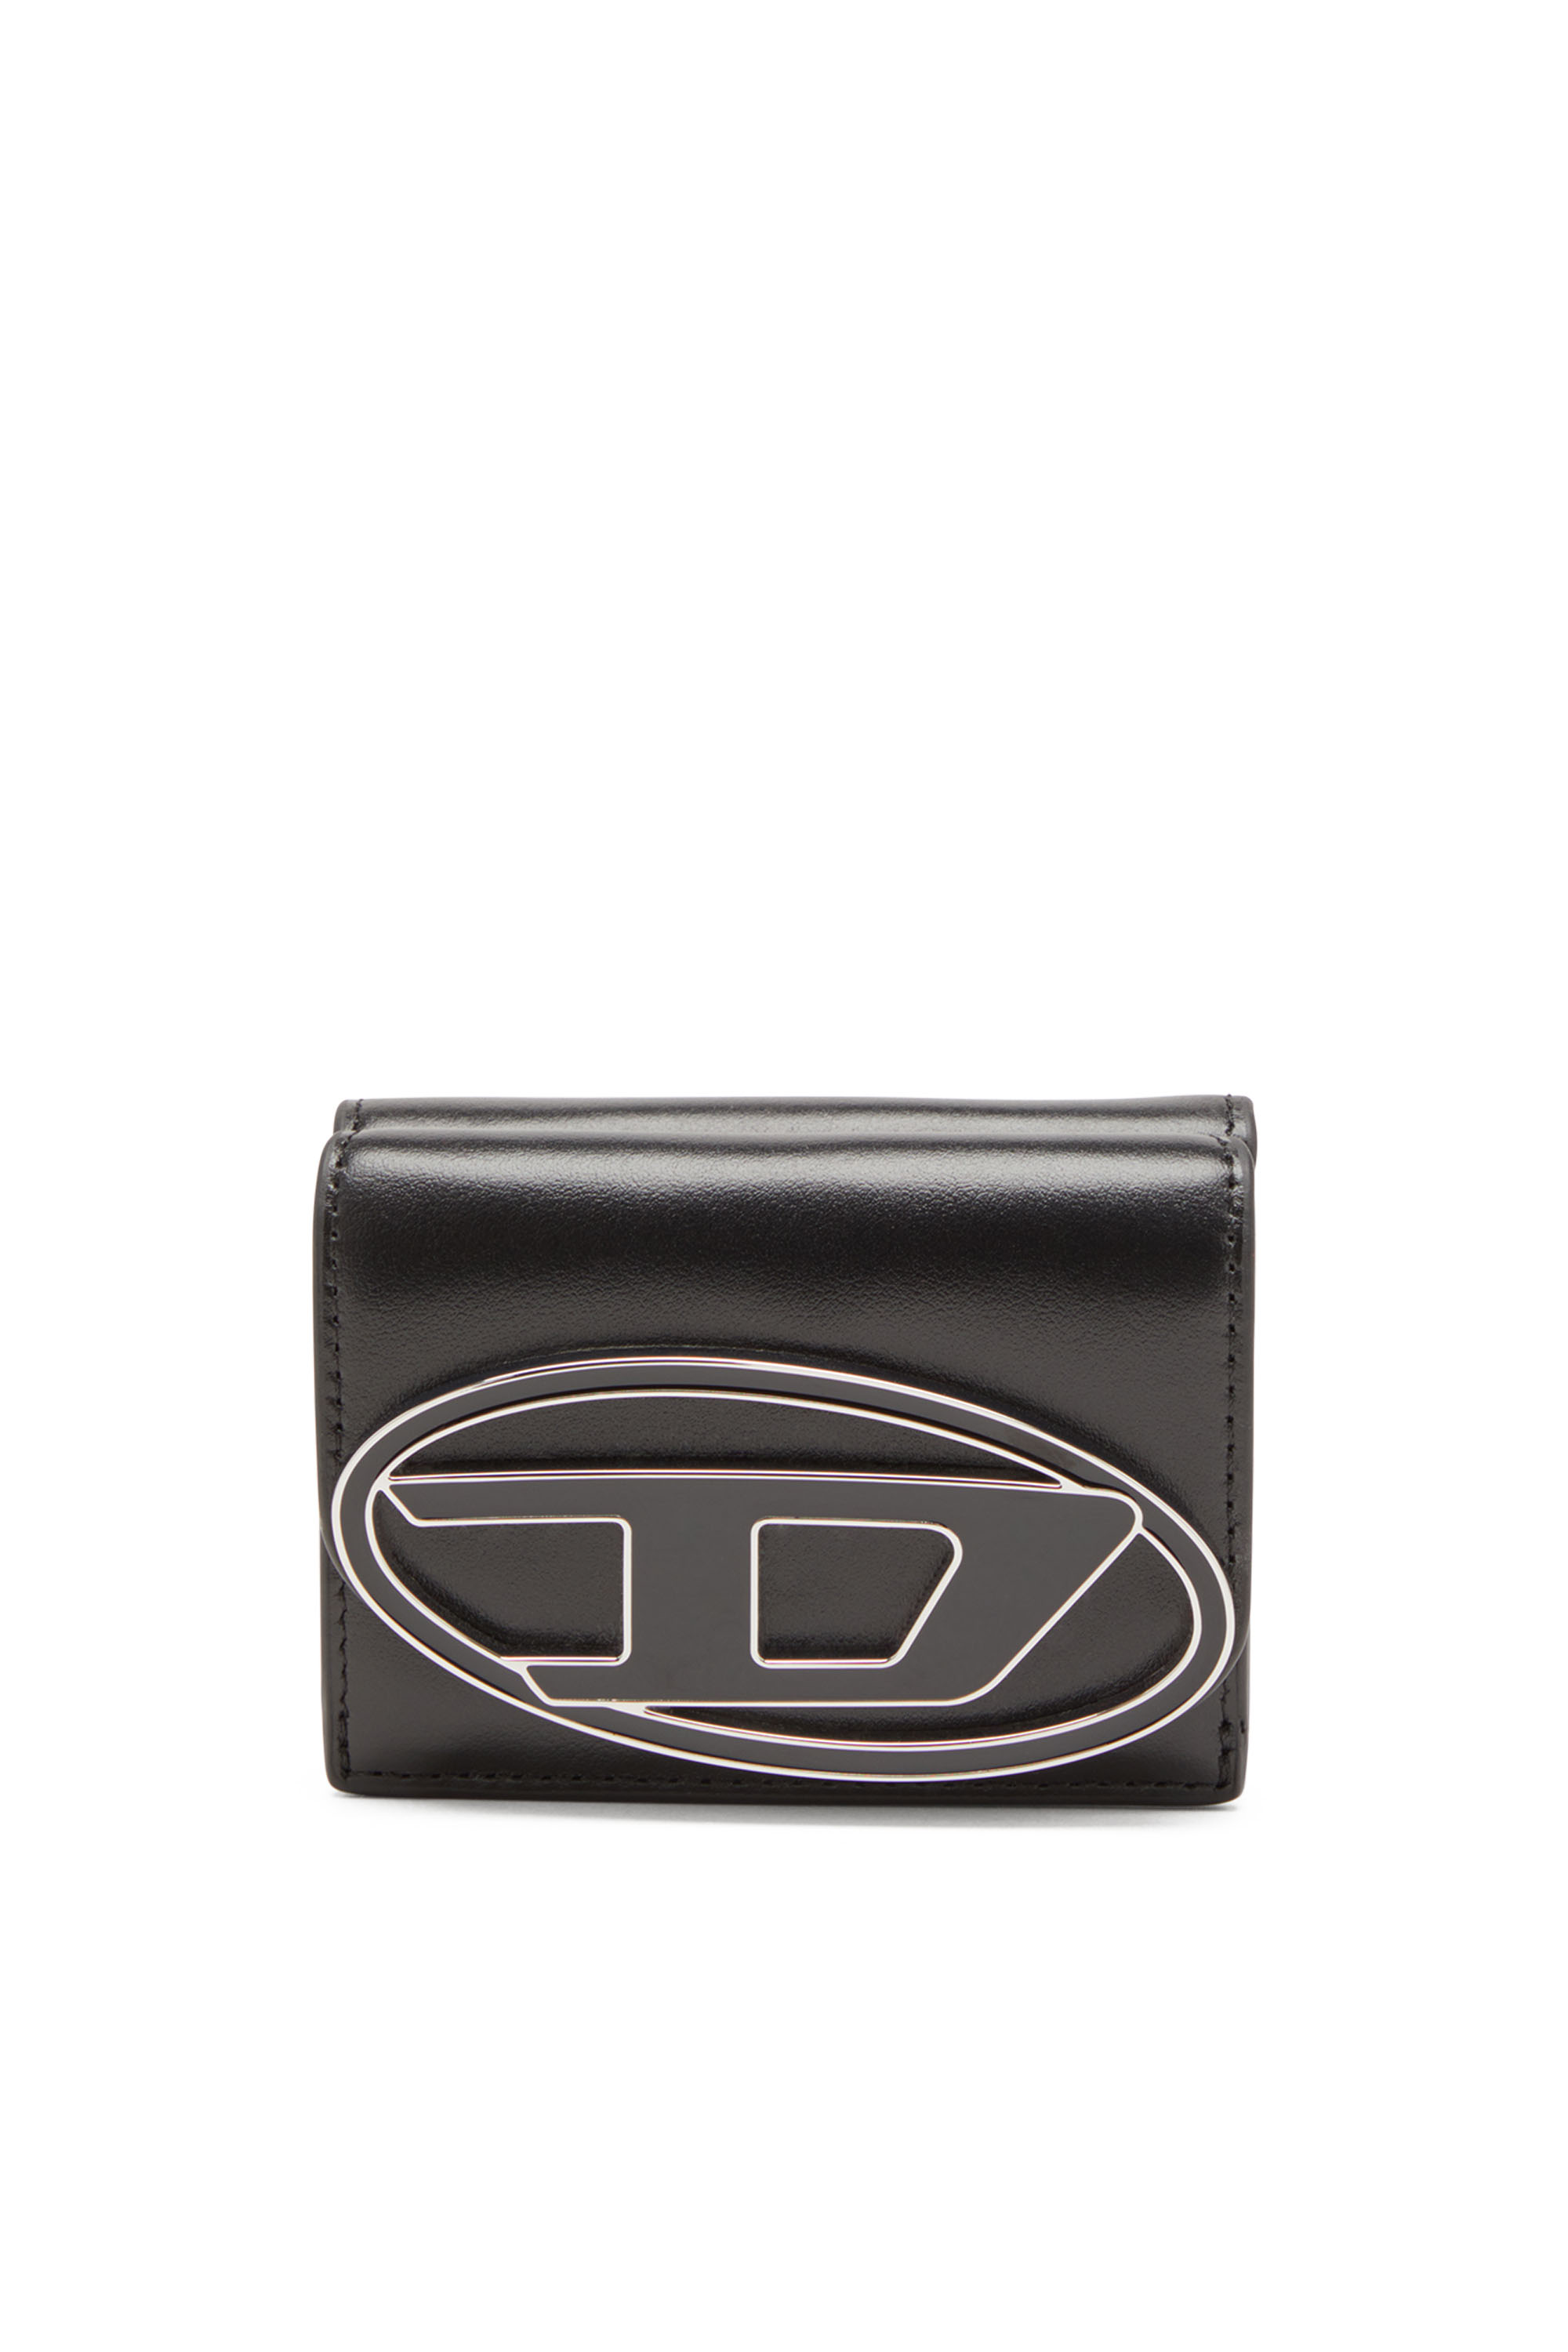 Diesel - 1DR TRI FOLD COIN XS II, Female Tri-fold wallet in leather in ブラック - Image 1